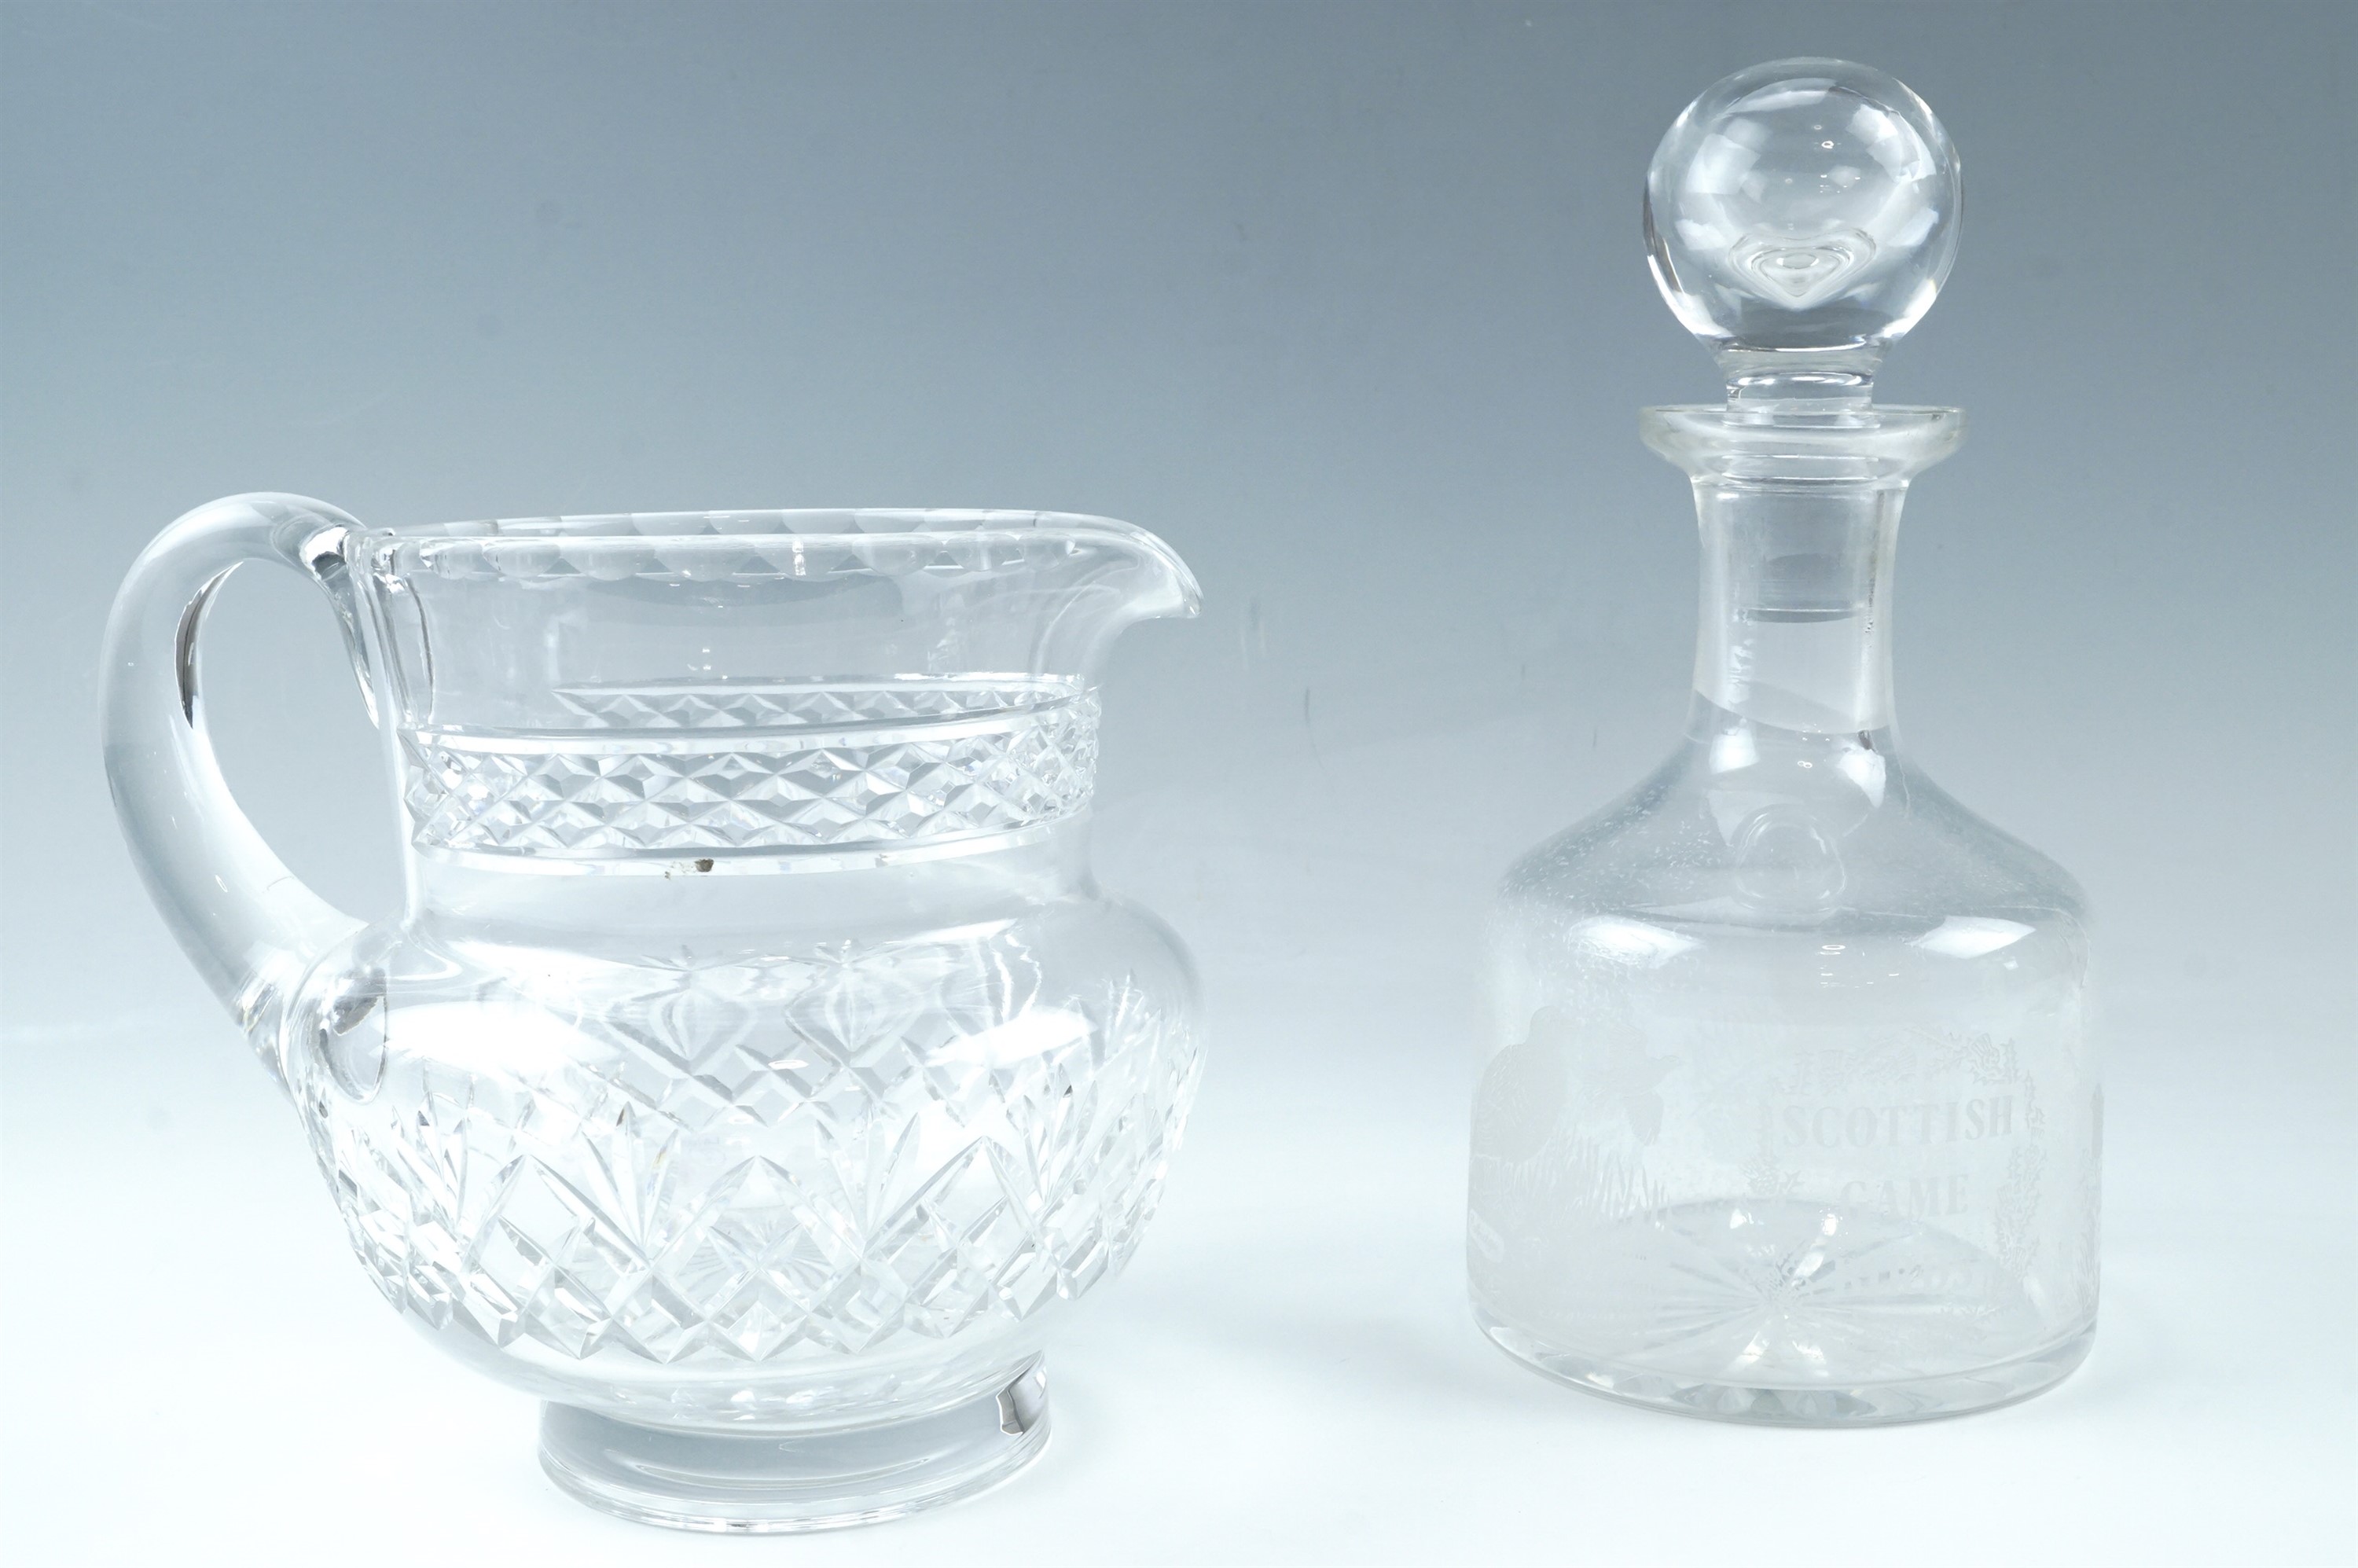 An Edinburgh Crystal "Scottish Game Birds" etched glass decanter, together with a cut glass whisky